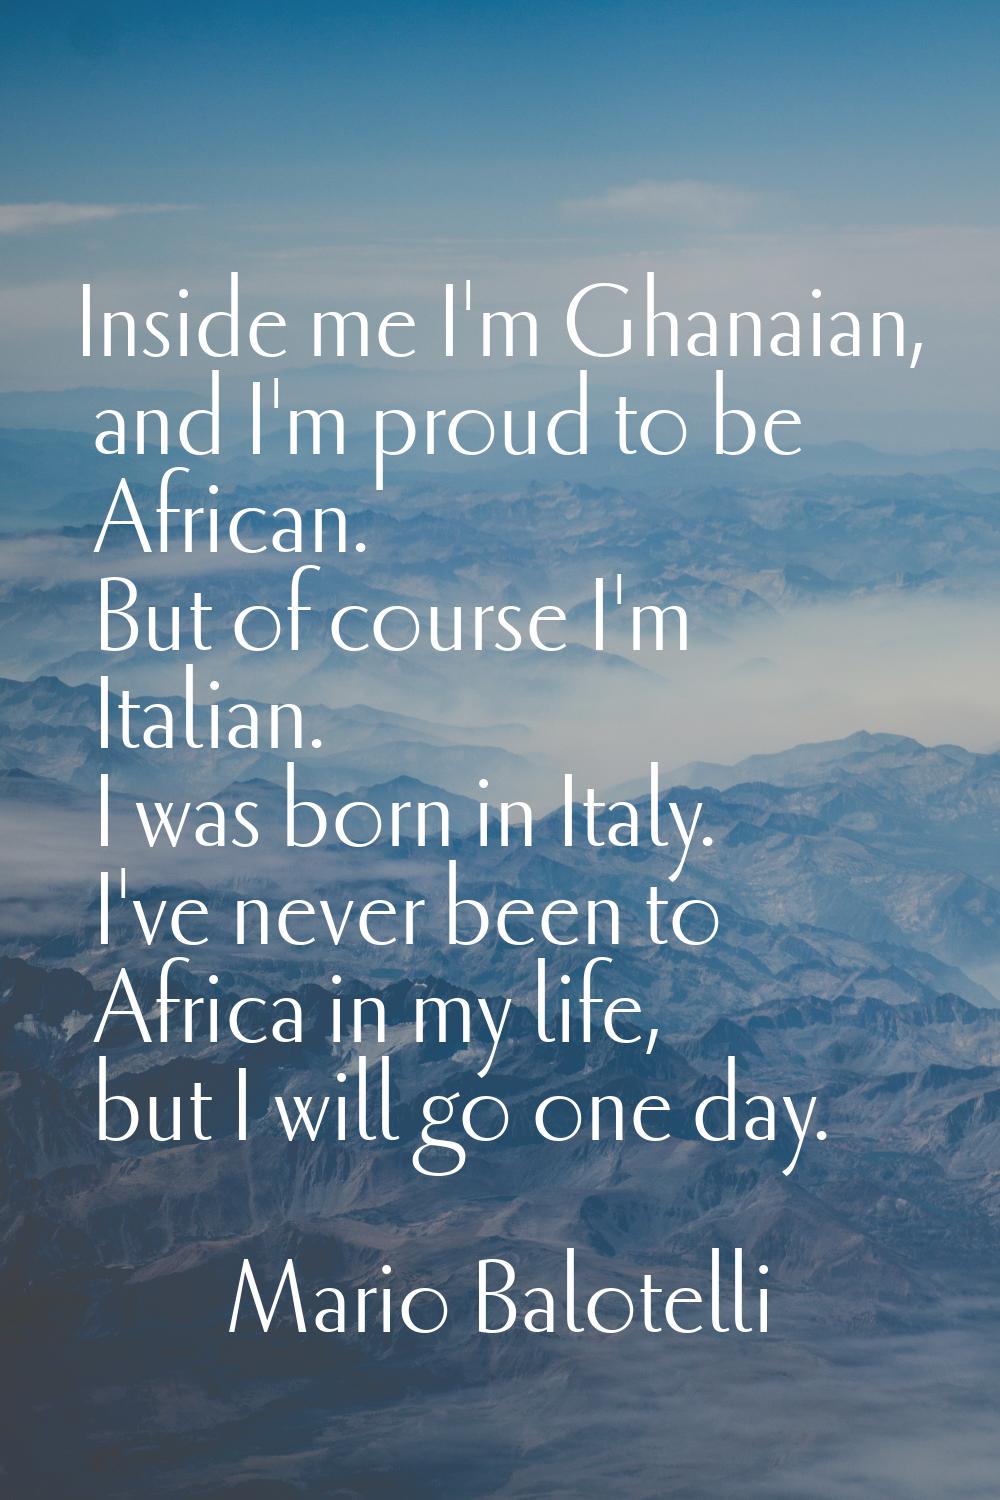 Inside me I'm Ghanaian, and I'm proud to be African. But of course I'm Italian. I was born in Italy